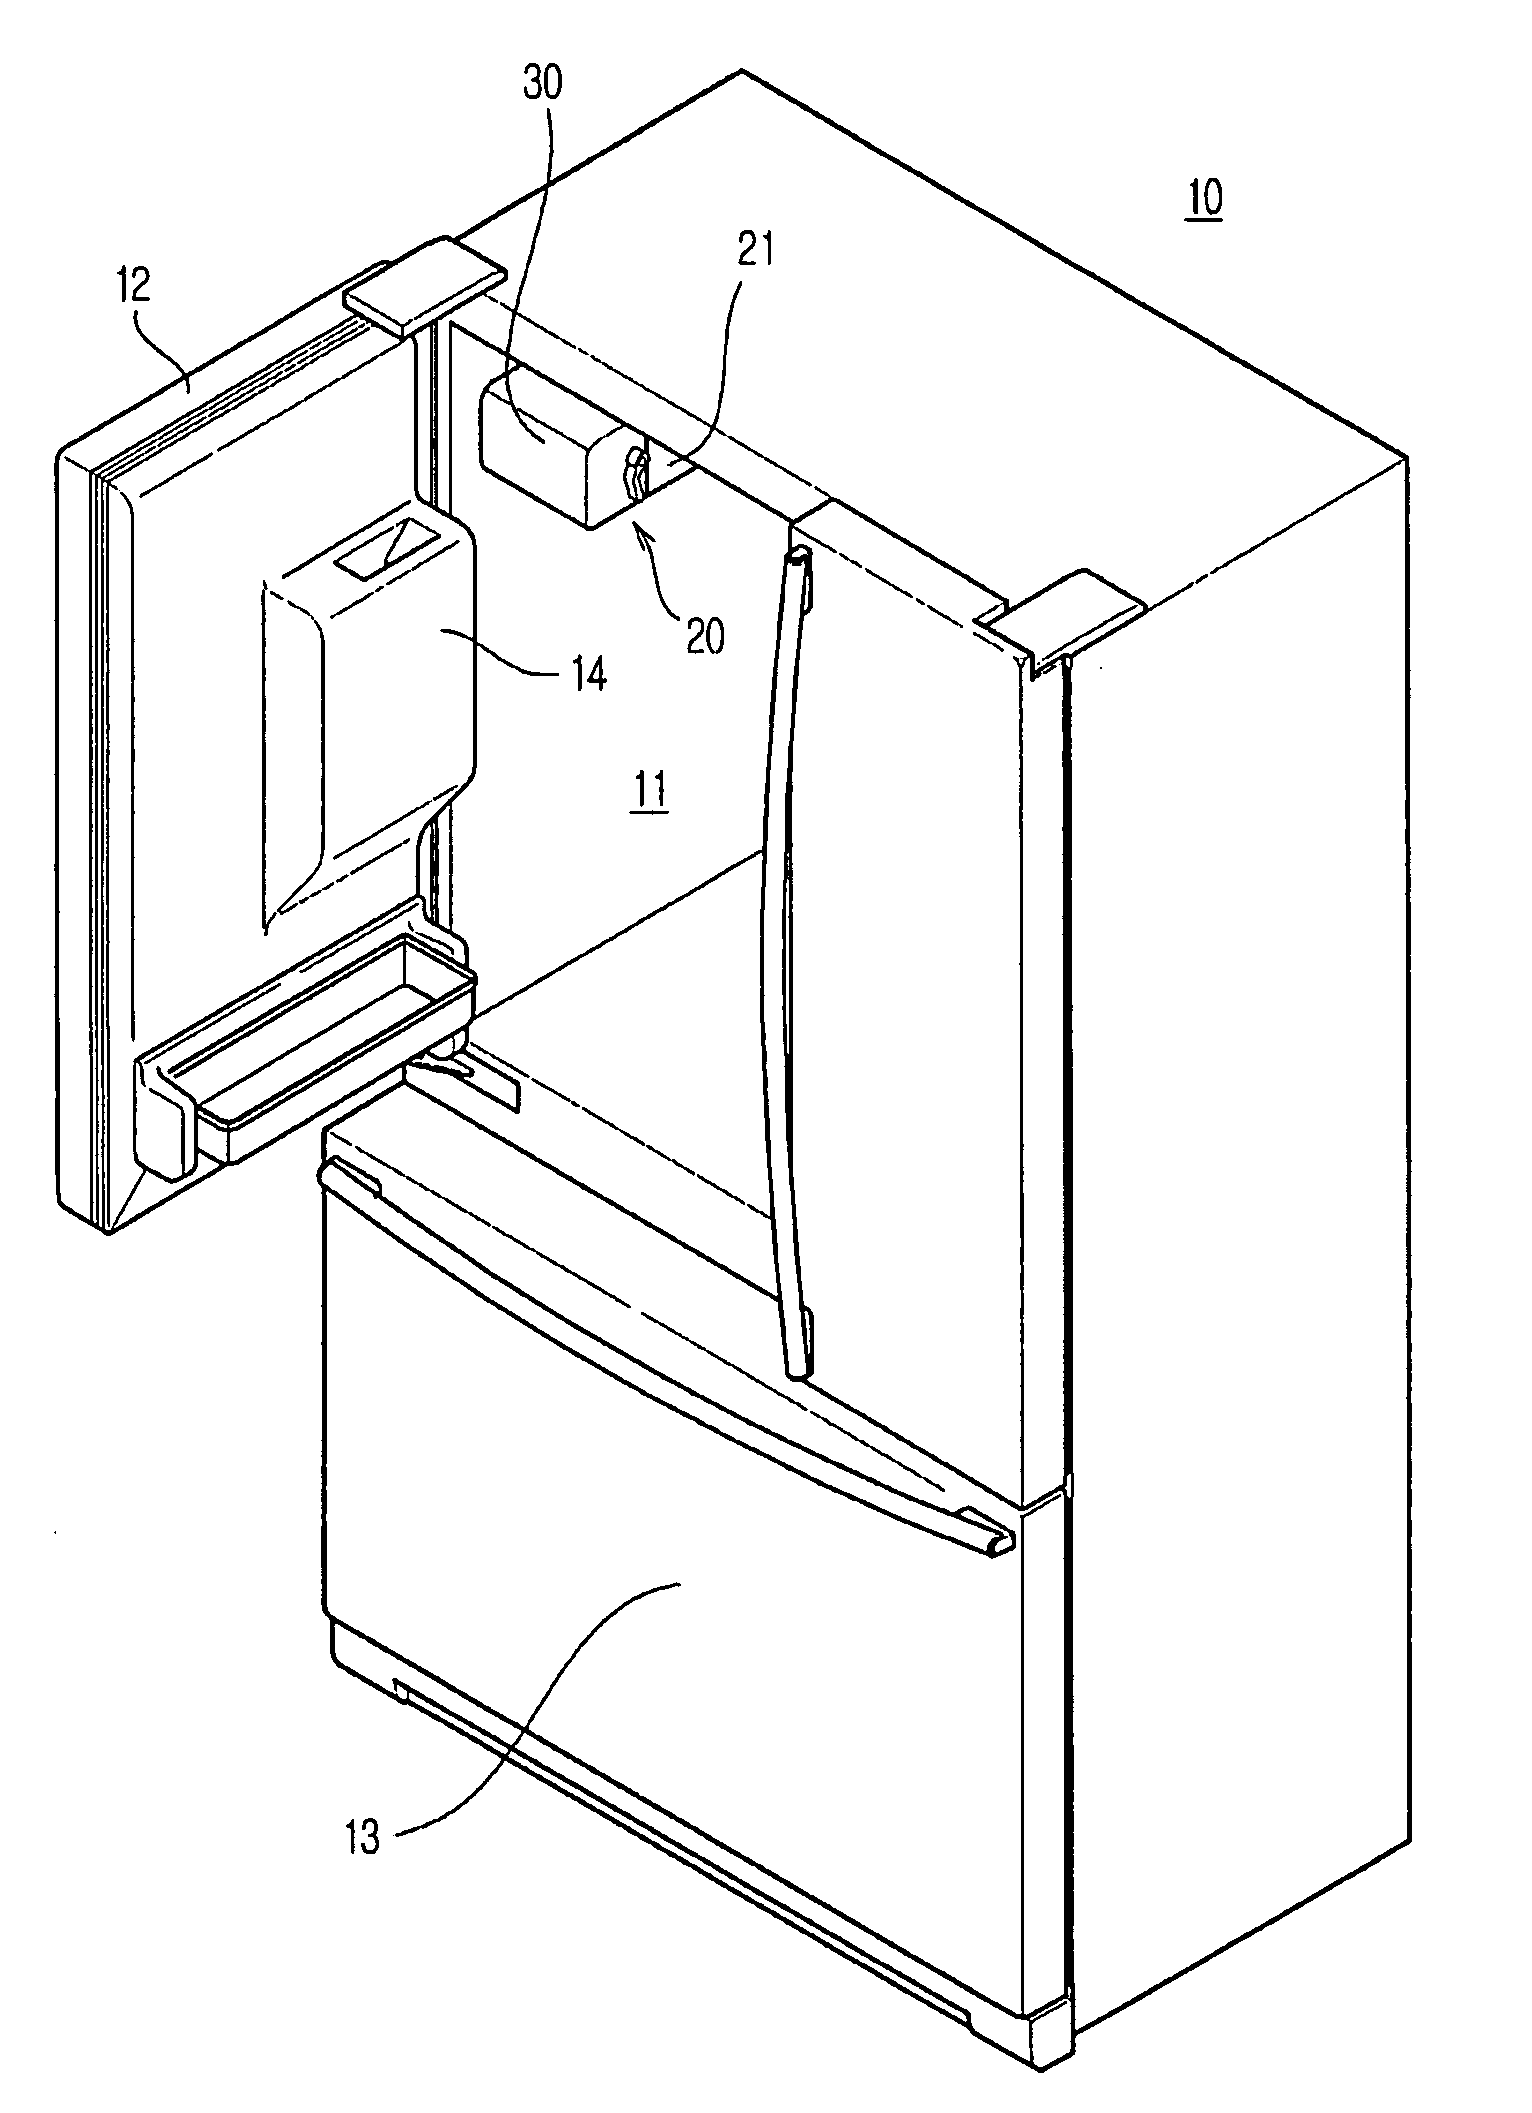 Refrigerator with ice-making unit